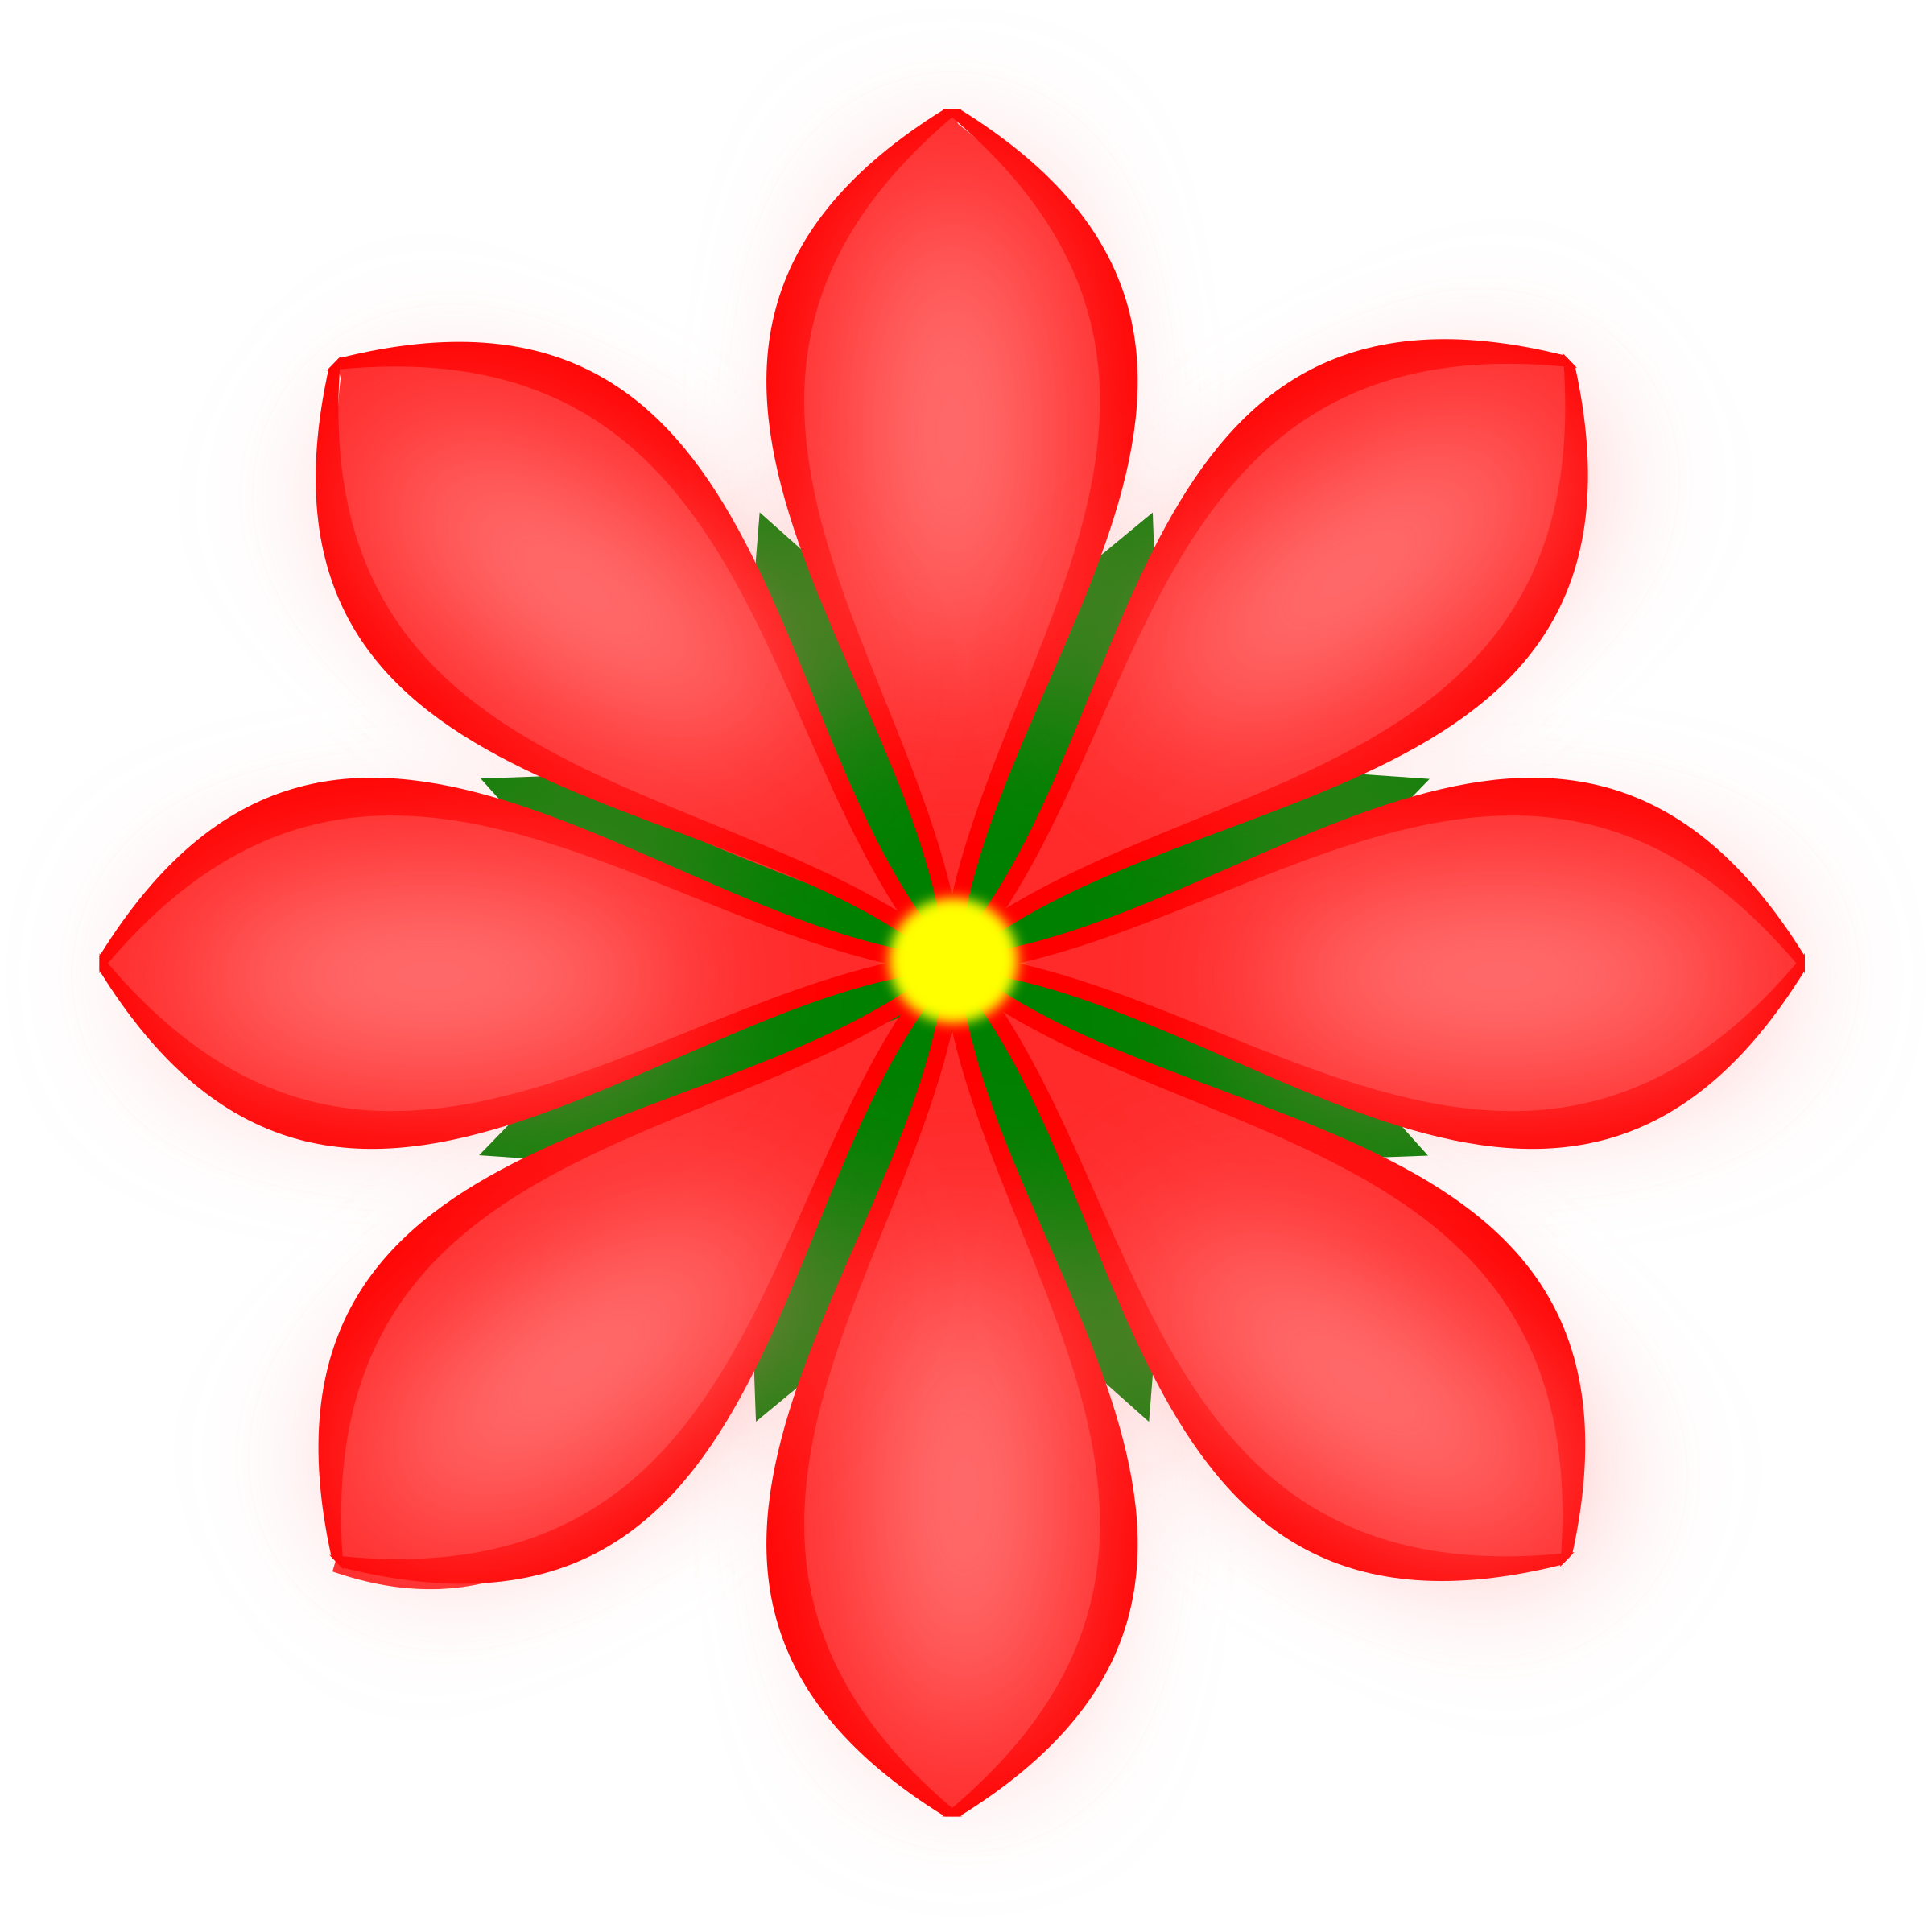 Download Red Flower vector image - Free stock photo - Public Domain ...